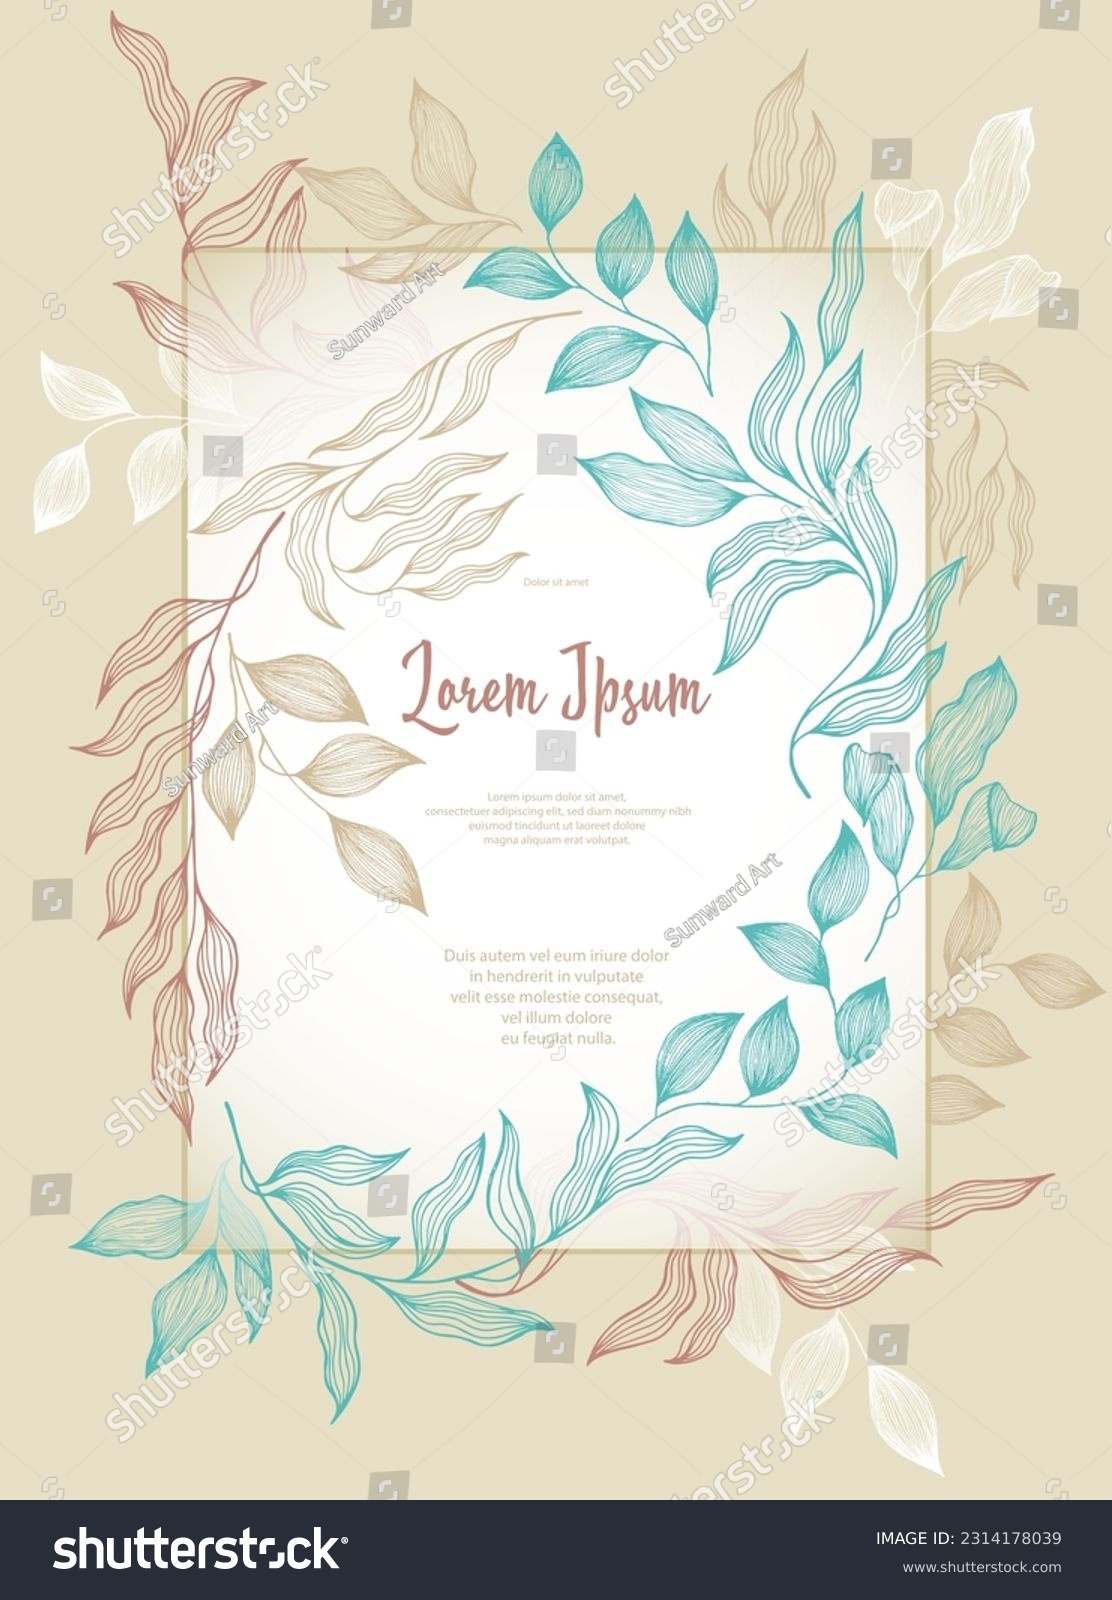 SVG of Bay leaves frame vector greeting card template. Elegant bay tree branches summer bouquet. Organic card design with laurel foliage. Tropical eucalyptus leaves on twigs frame template. Garden plant svg